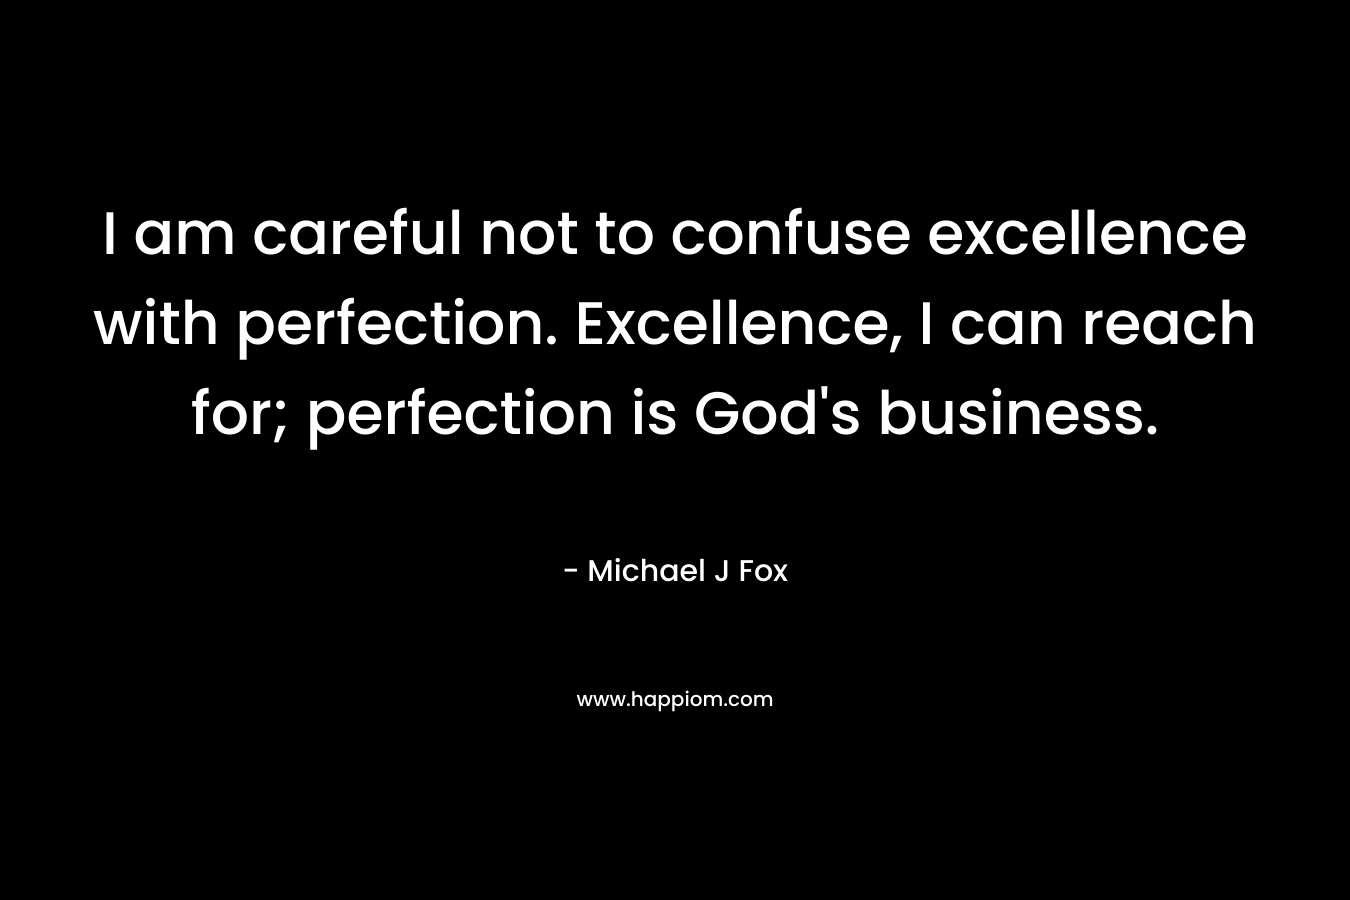 I am careful not to confuse excellence with perfection. Excellence, I can reach for; perfection is God's business.